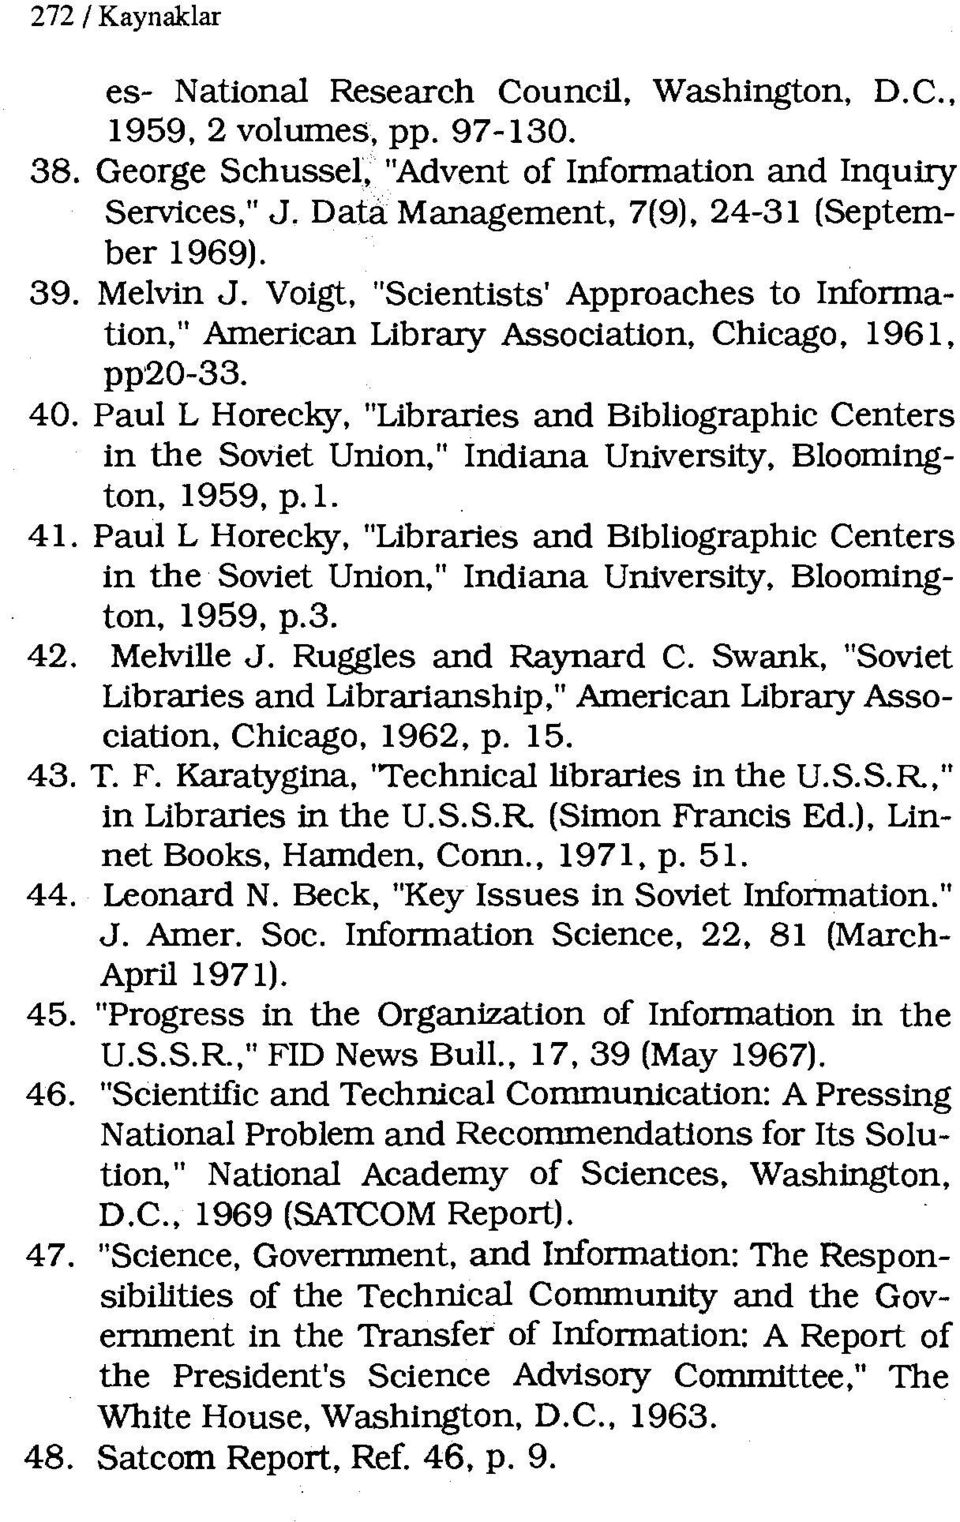 Paul L Horecky, "Libraries and Bibliographic Centers in the Soviet Union," Indiana University, Bloomington, 1959, p.l. 41.